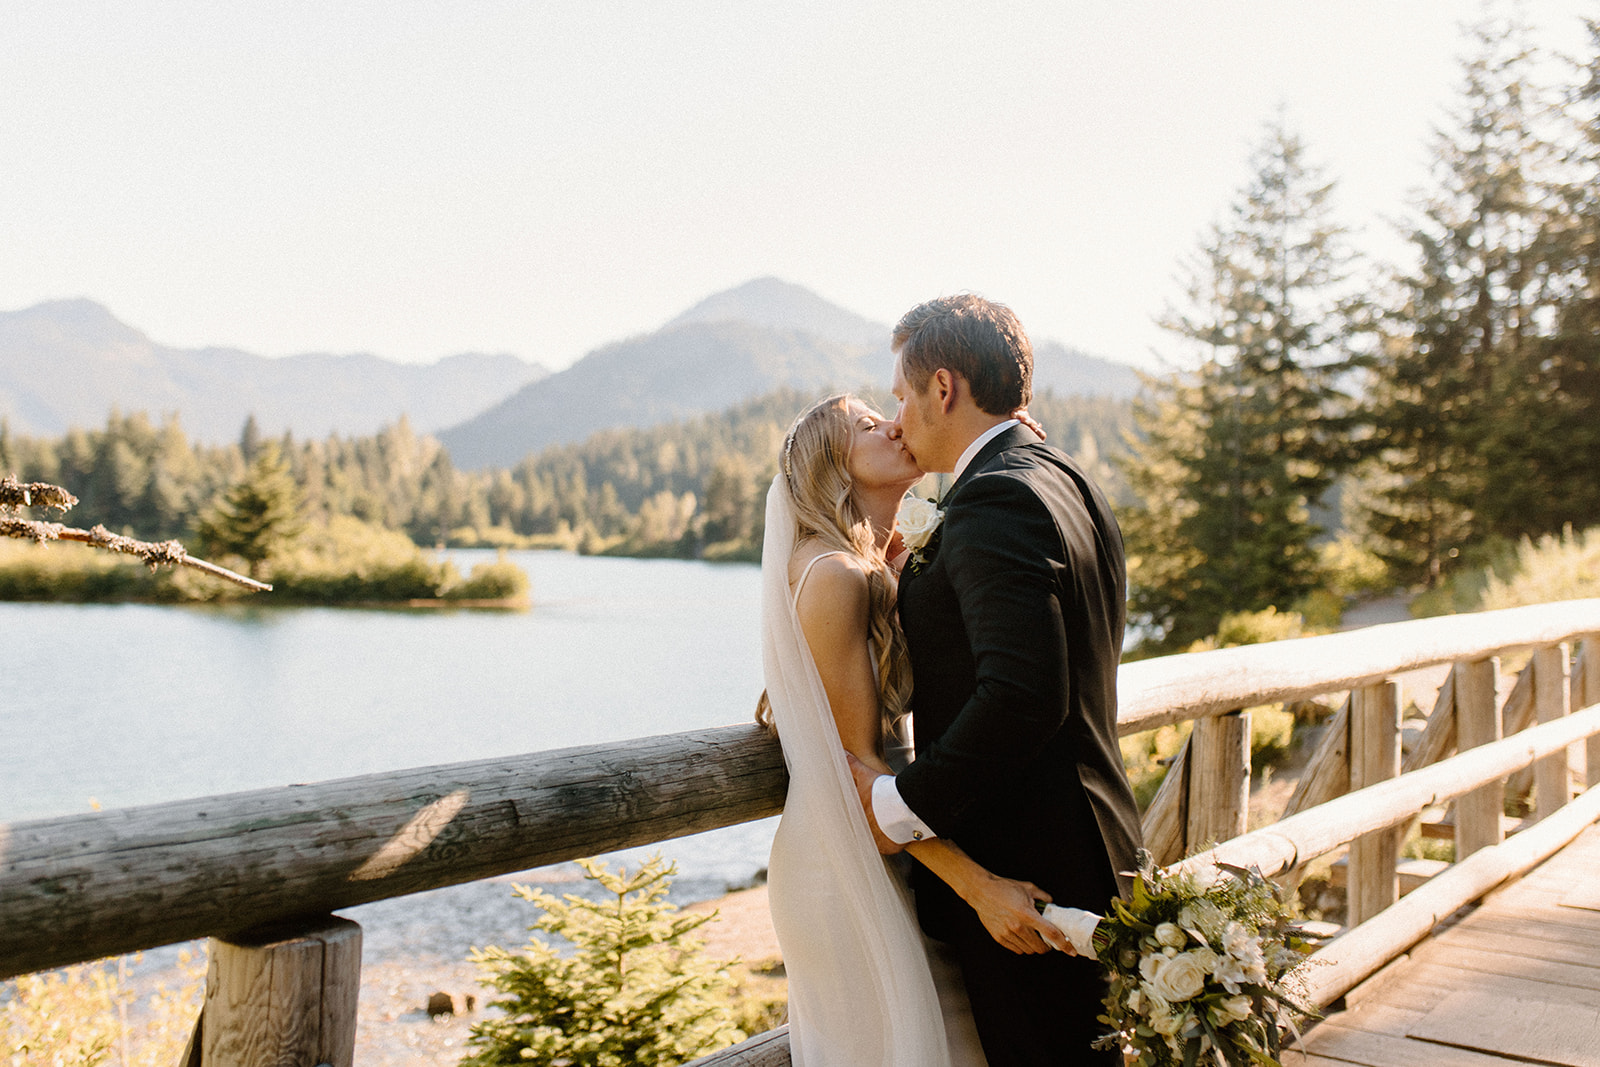 Bride and groom photos with beautiful backdrops for a Gold Creek Pond Elopement